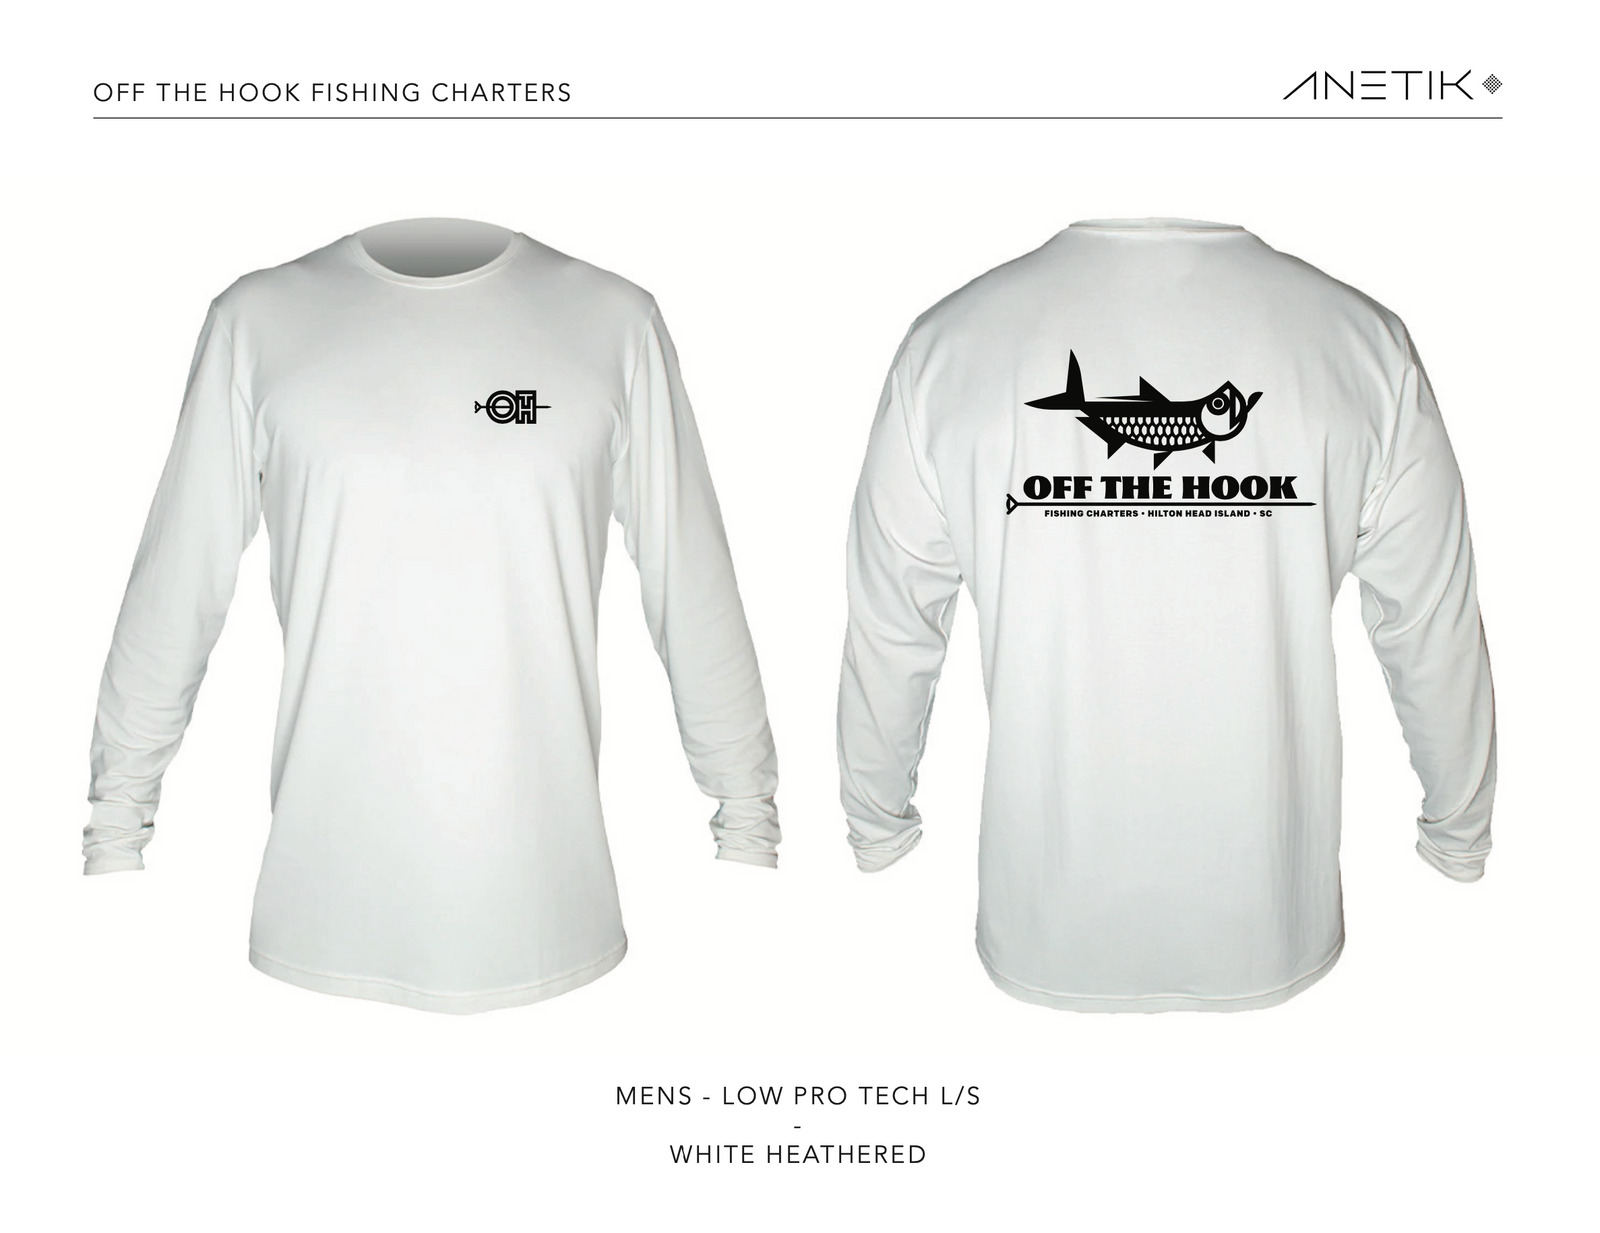 OFF THE HOOK - ANETIK - LOW PRO TECH L/S - SKY HEATHERED - Off The Hook Fishing  Charters